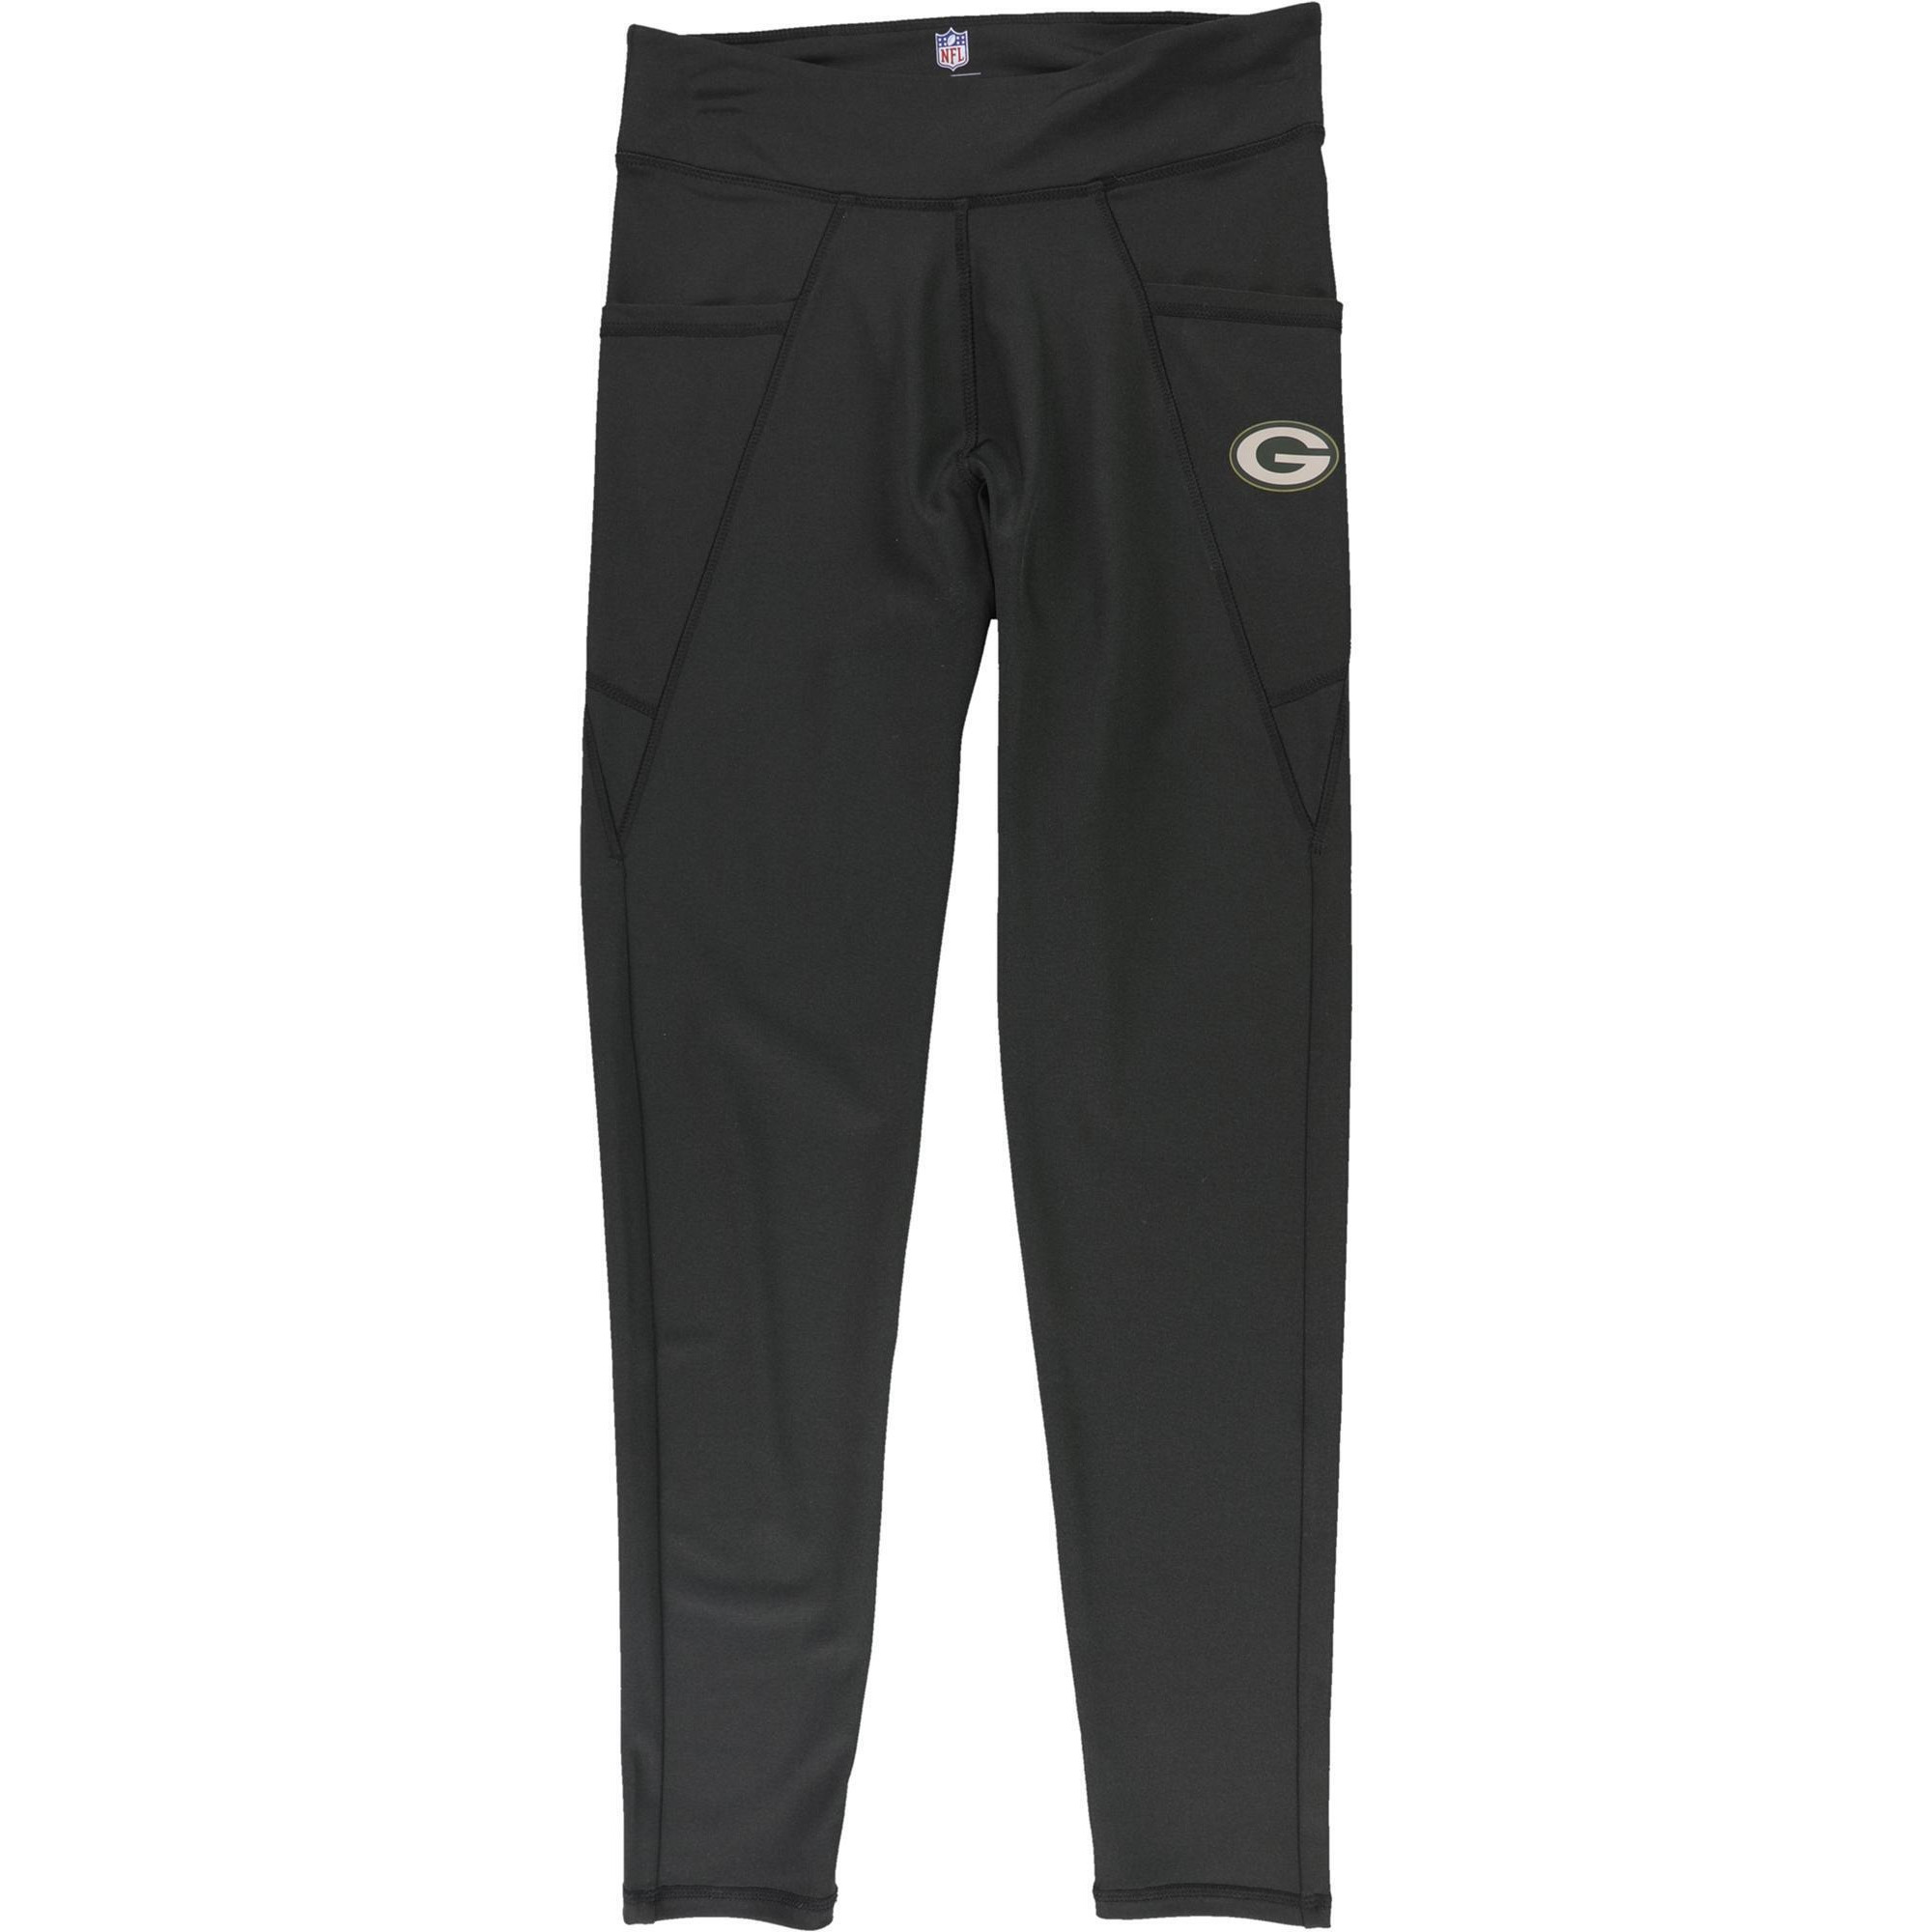 G-III Sports Womens Green Bay Packers Compression Athletic Pants, Style # 6Q10Z041